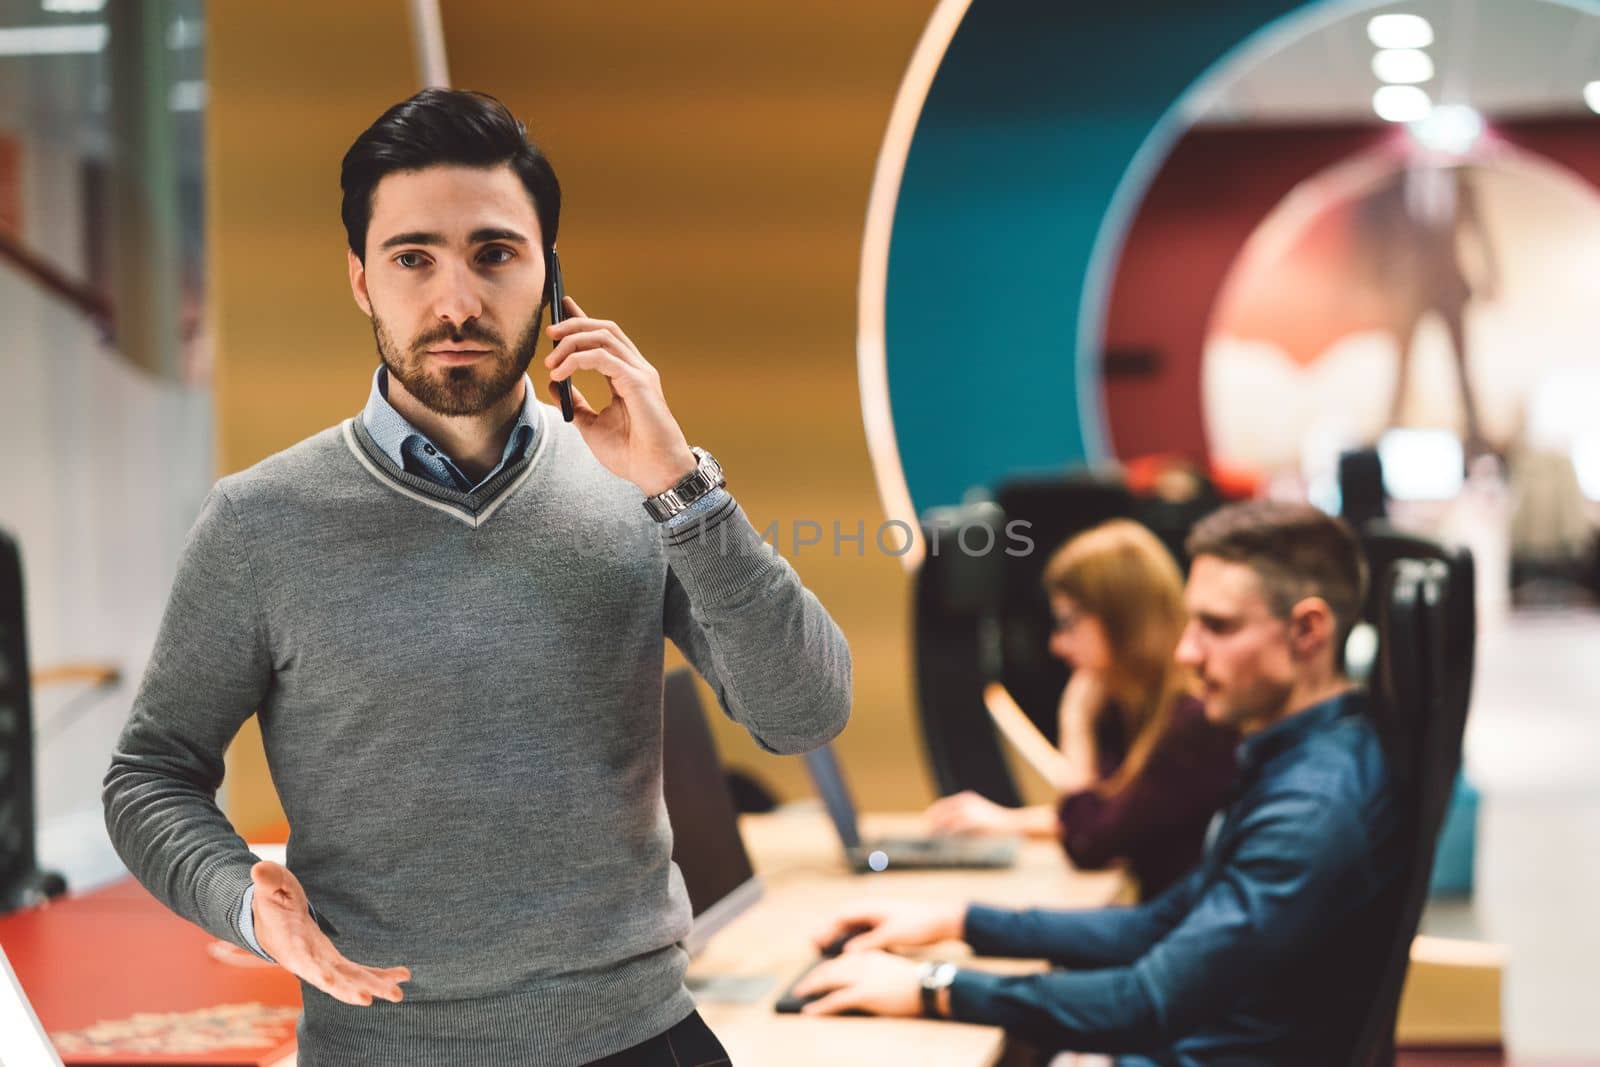 Young caucasian man with beard on a phone call while at the office, blurred in the background people working at their desk by VisualProductions